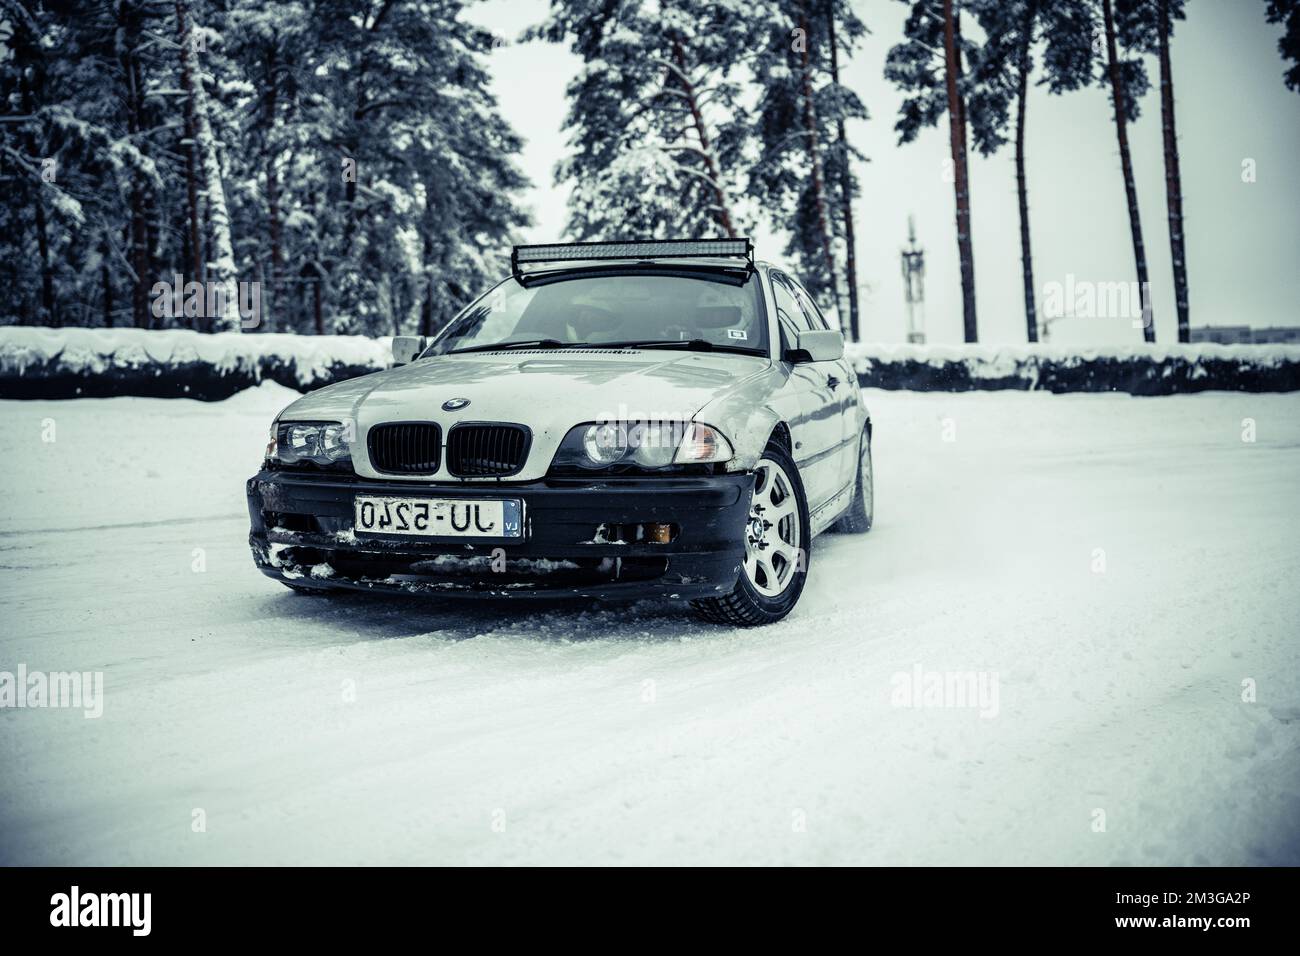 12-12-2022 Riga, Latvia  a car parked on a snowy road in the snow with trees in the background and snow on the ground. . Stock Photo